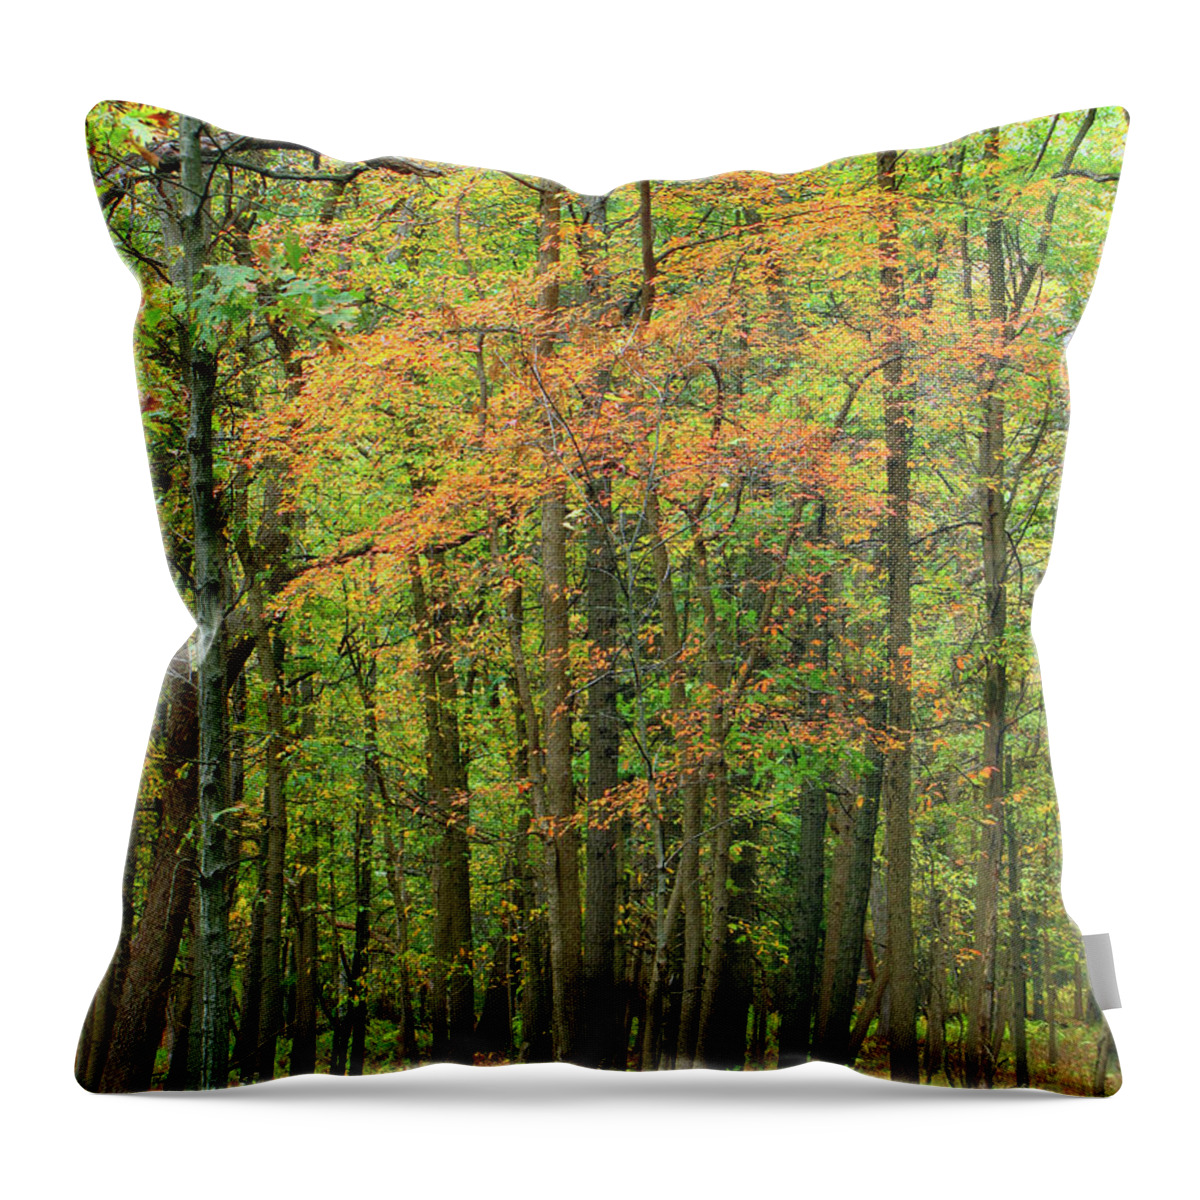 Landscape Throw Pillow featuring the photograph Touch Of Autumn by Cedric Hampton